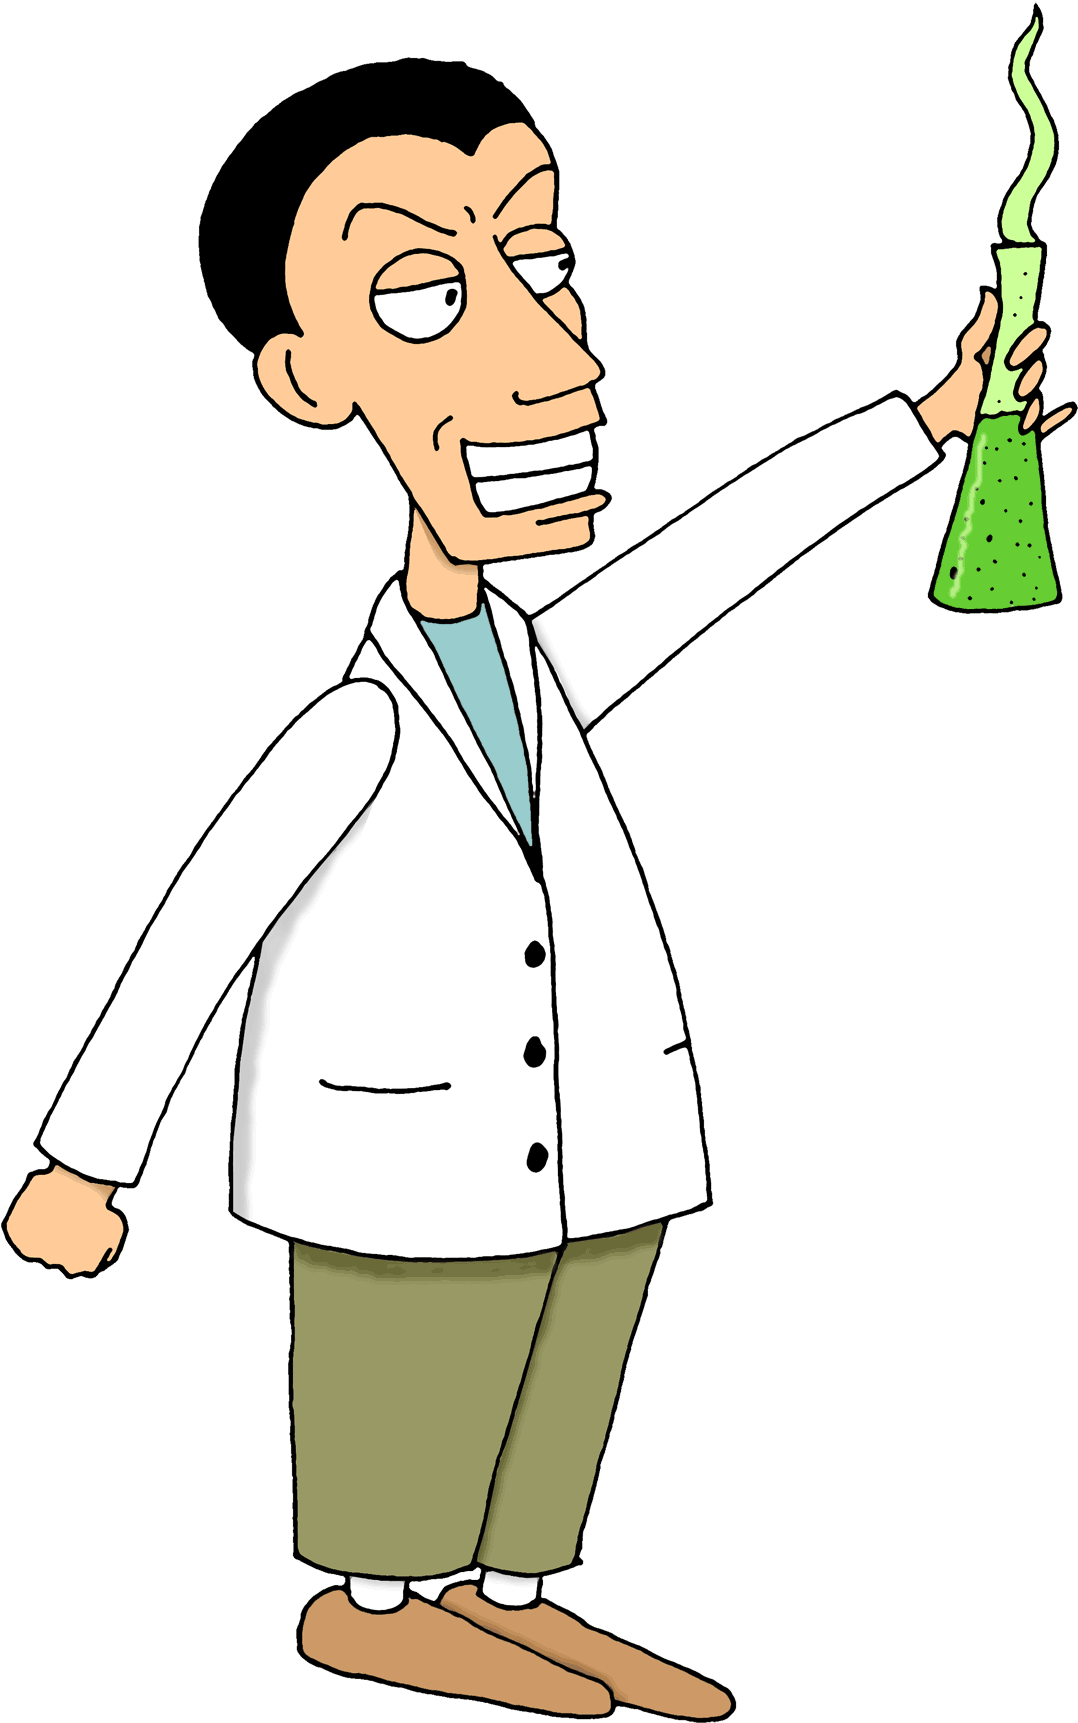 Animated Scientist Holding Flask